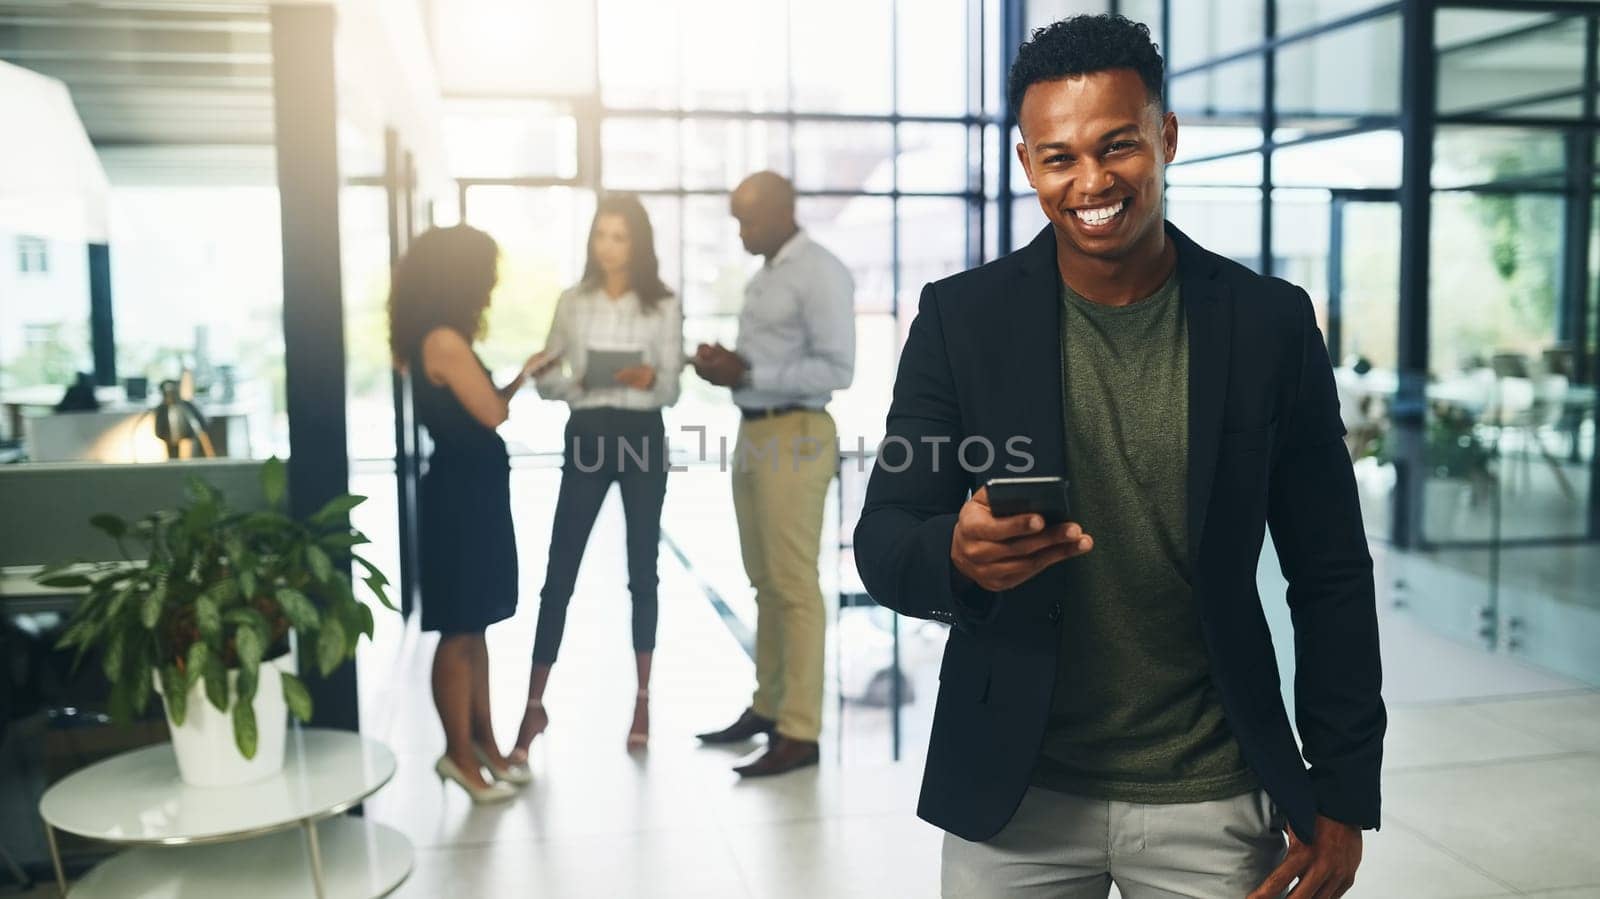 Technology helps me find all I need to operate business smoothly. Portrait of a young businessman using a cellphone in an office with his colleagues in the background. by YuriArcurs